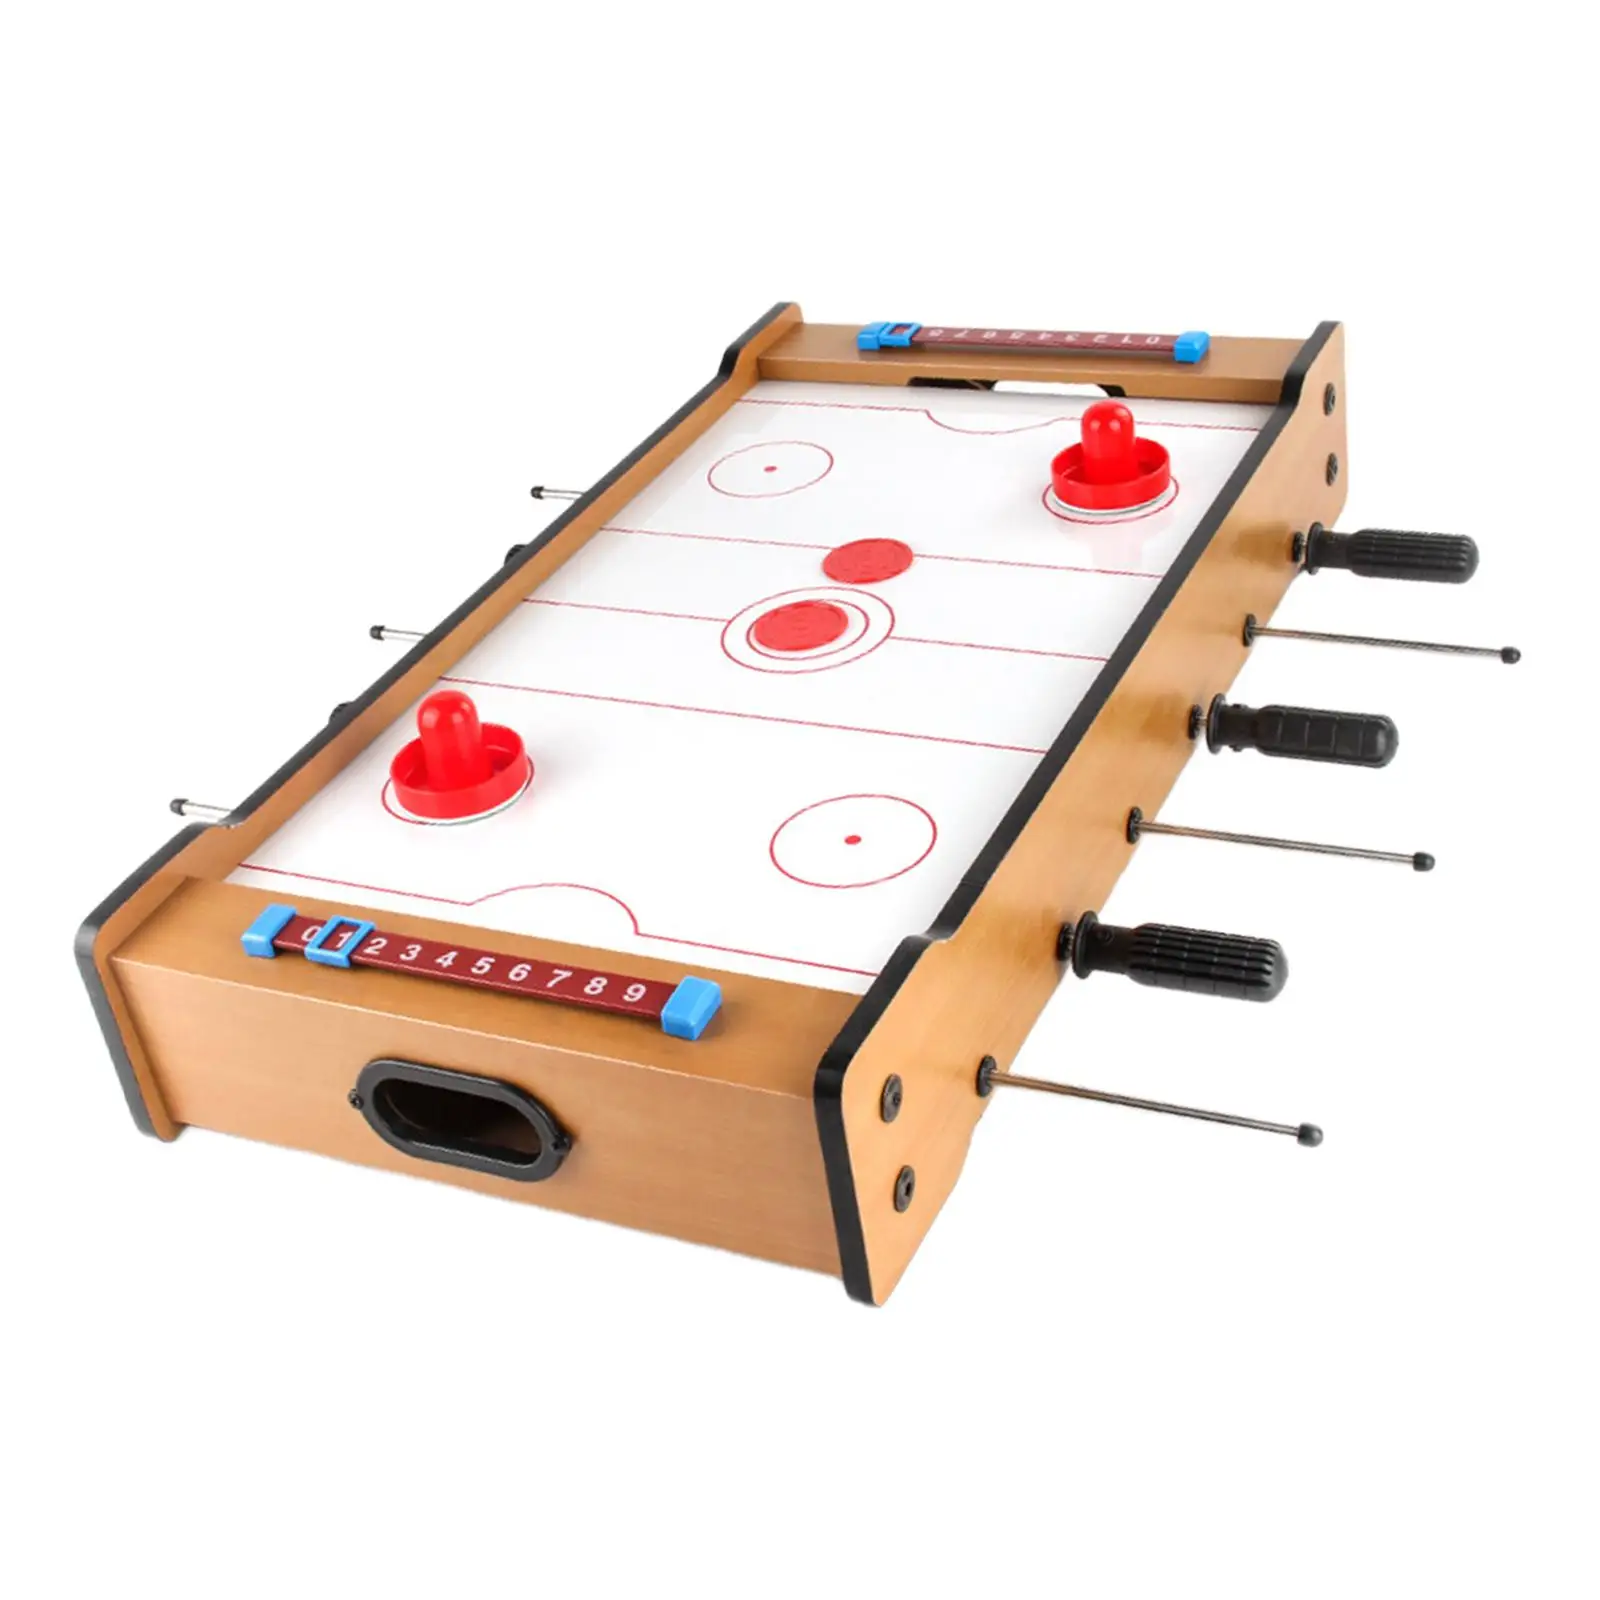 Cute Soccer Hockey Game Set Family Game Football Board Toy Sport Game Tabletop Play for Entertainment Two Sports